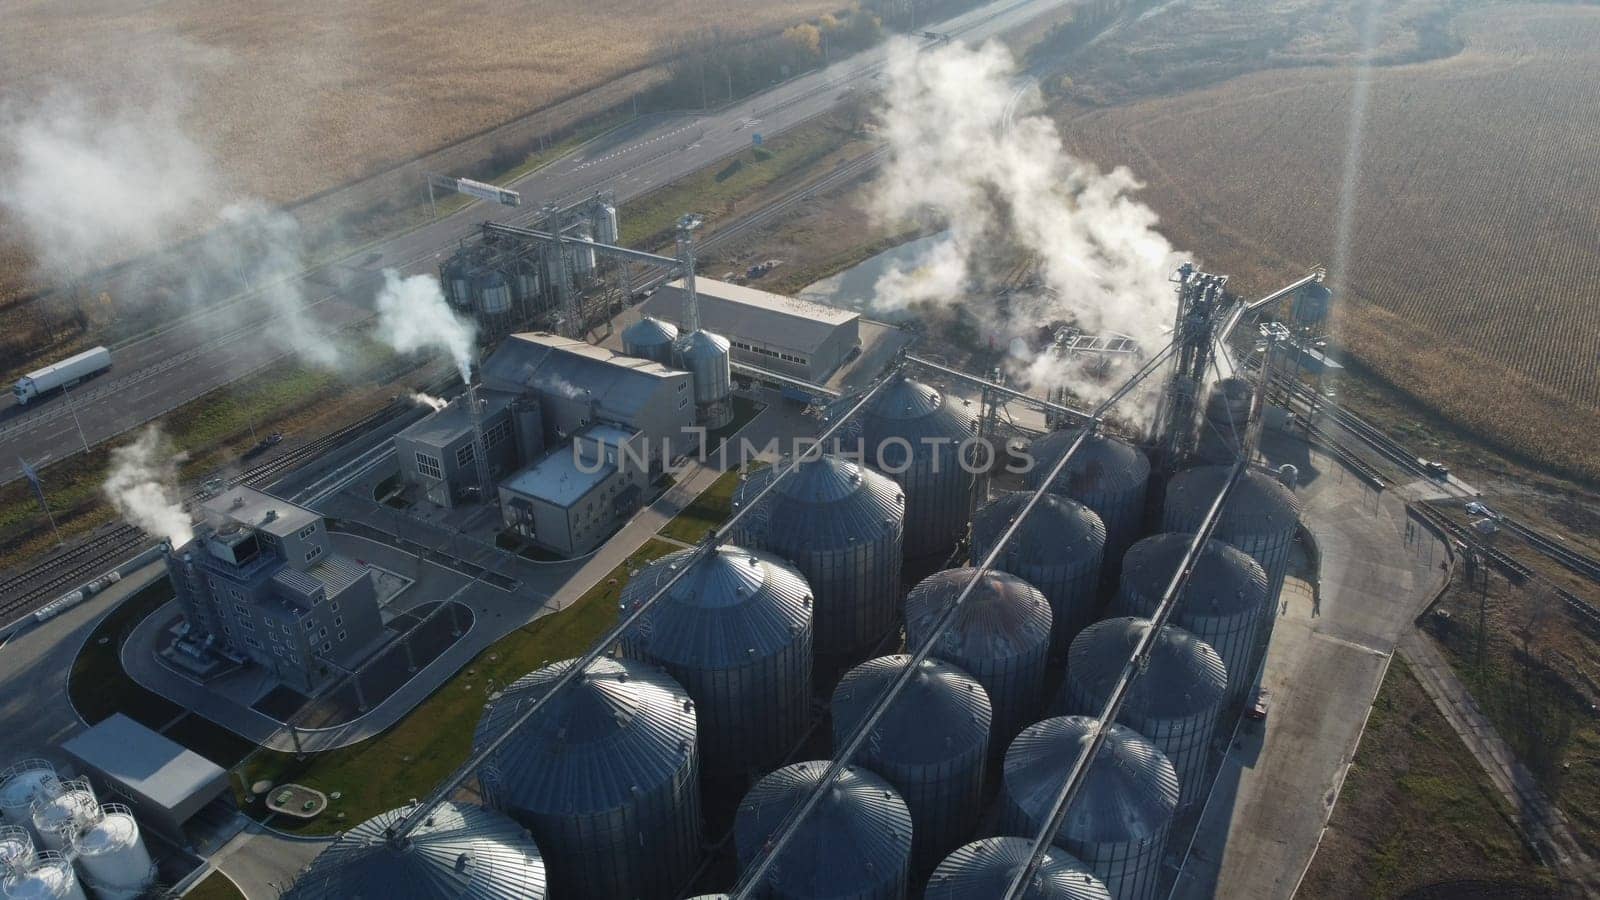 Grain elevator. Granary. Large metal structure grain elevator. Storage facility for grain. Top view. Grain storage. Silos. Metal hangar for cereal. Modern new elevator plant. agricultural agribusiness